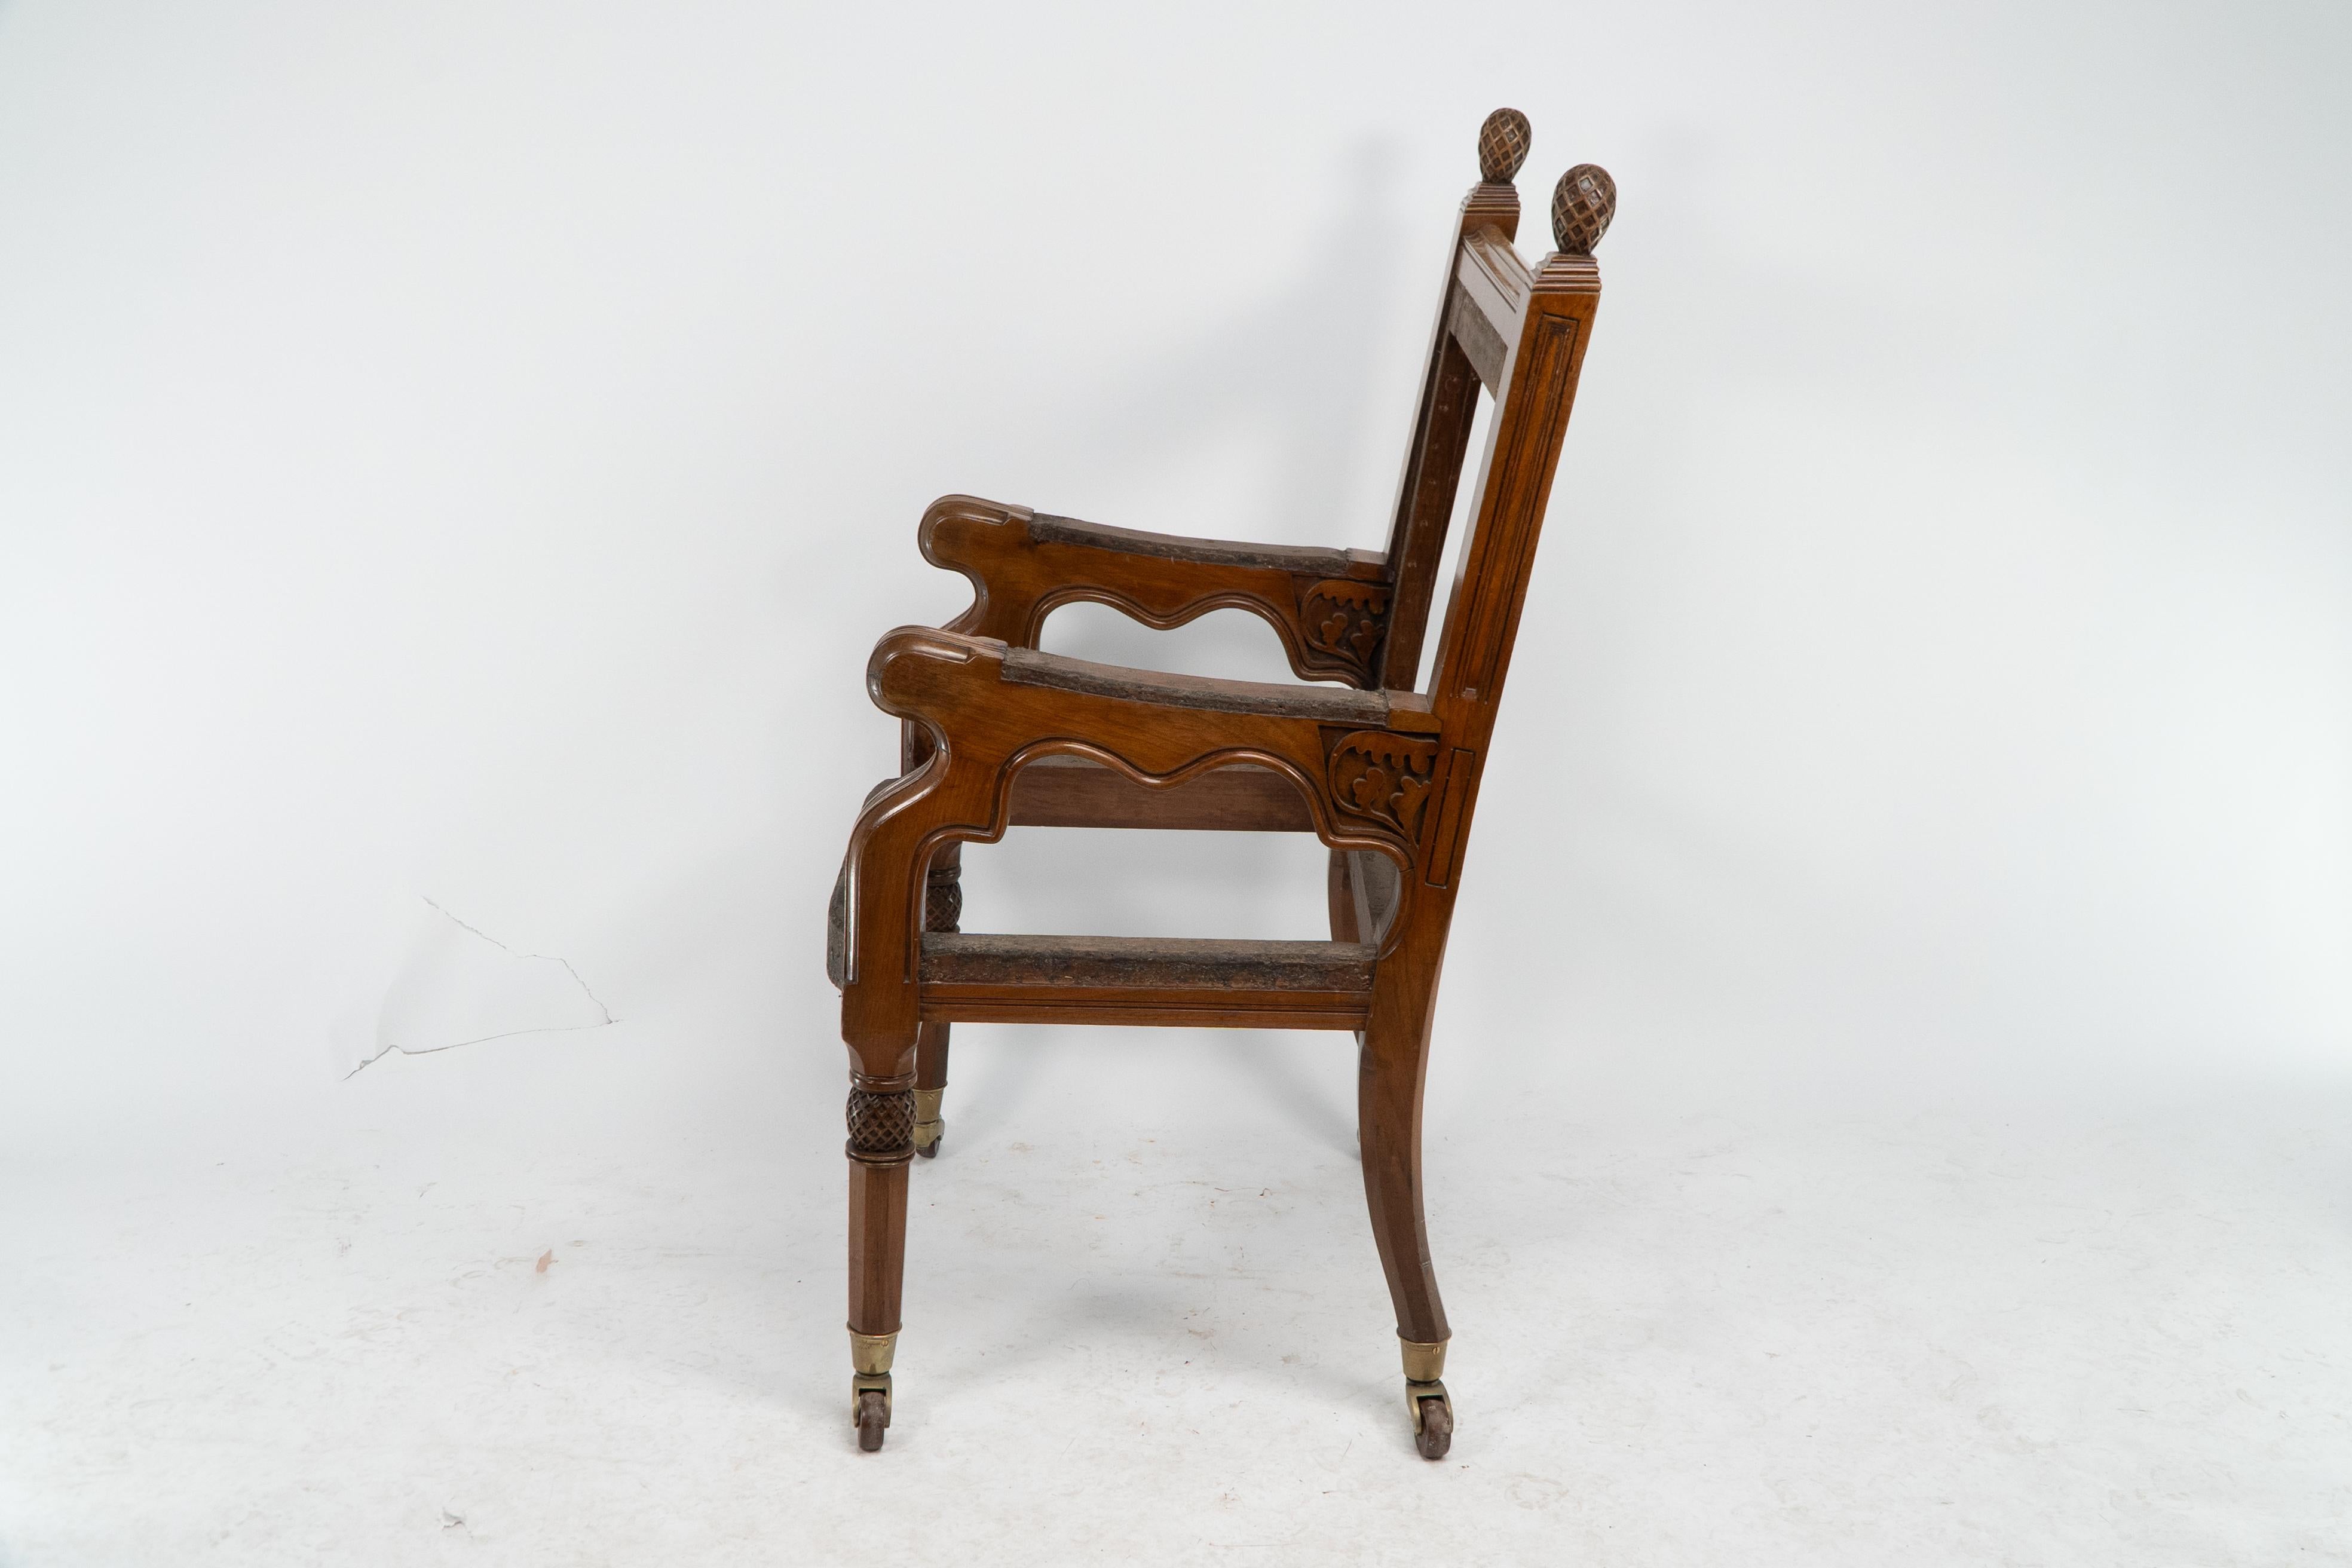 English George Edmund Street. Judges armchair designed for The Royal Courts of Justice. For Sale